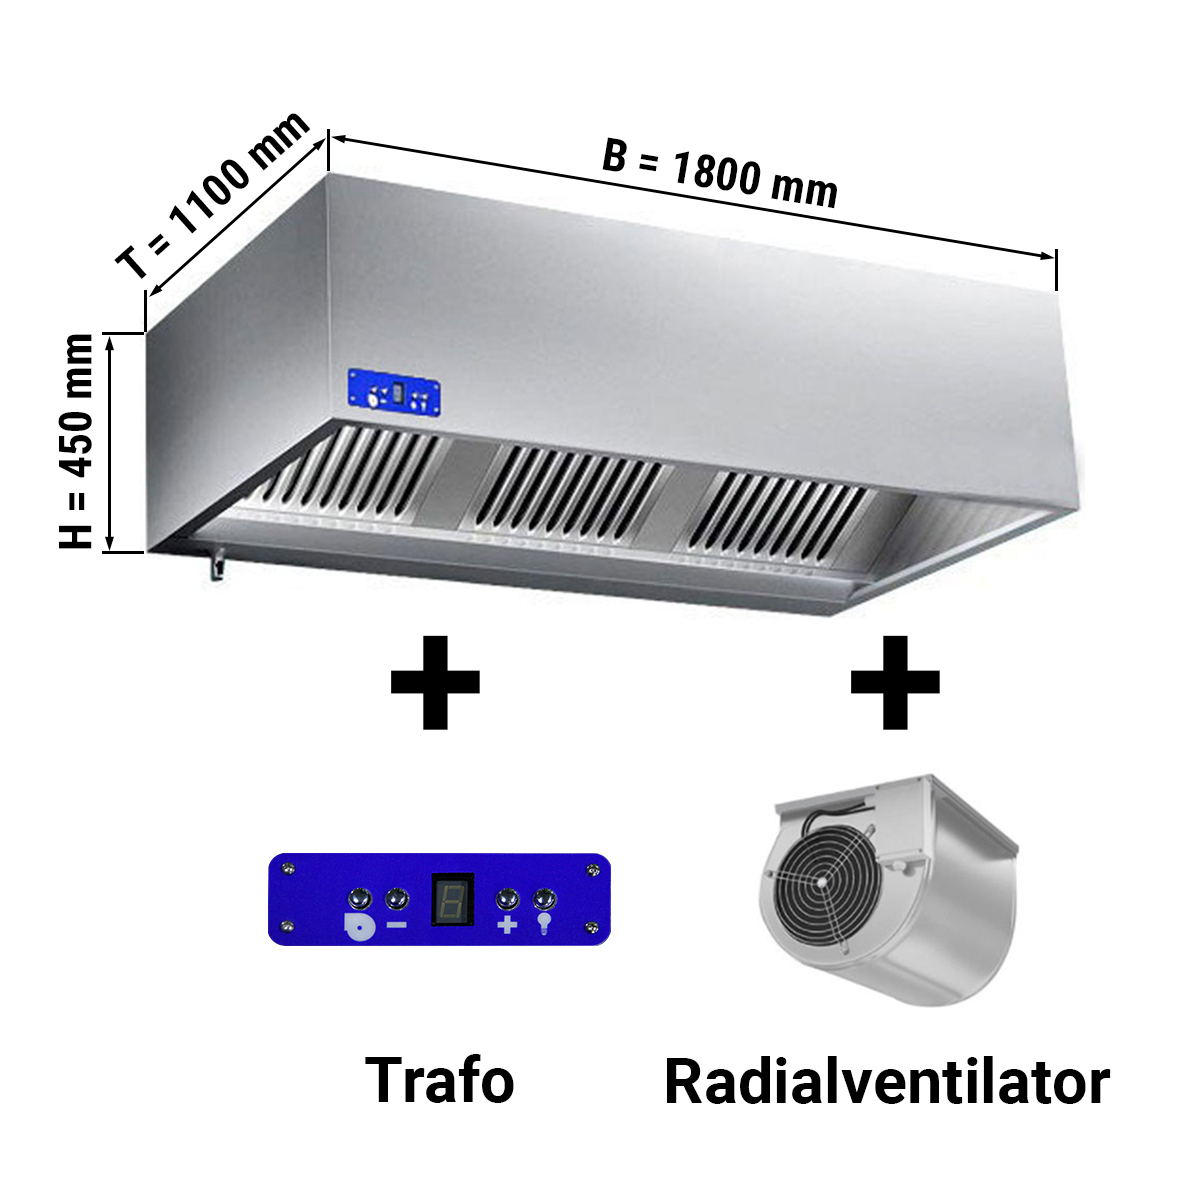 Ventilation hood with motor, controller, filter and lamp 1800X1100X450MM